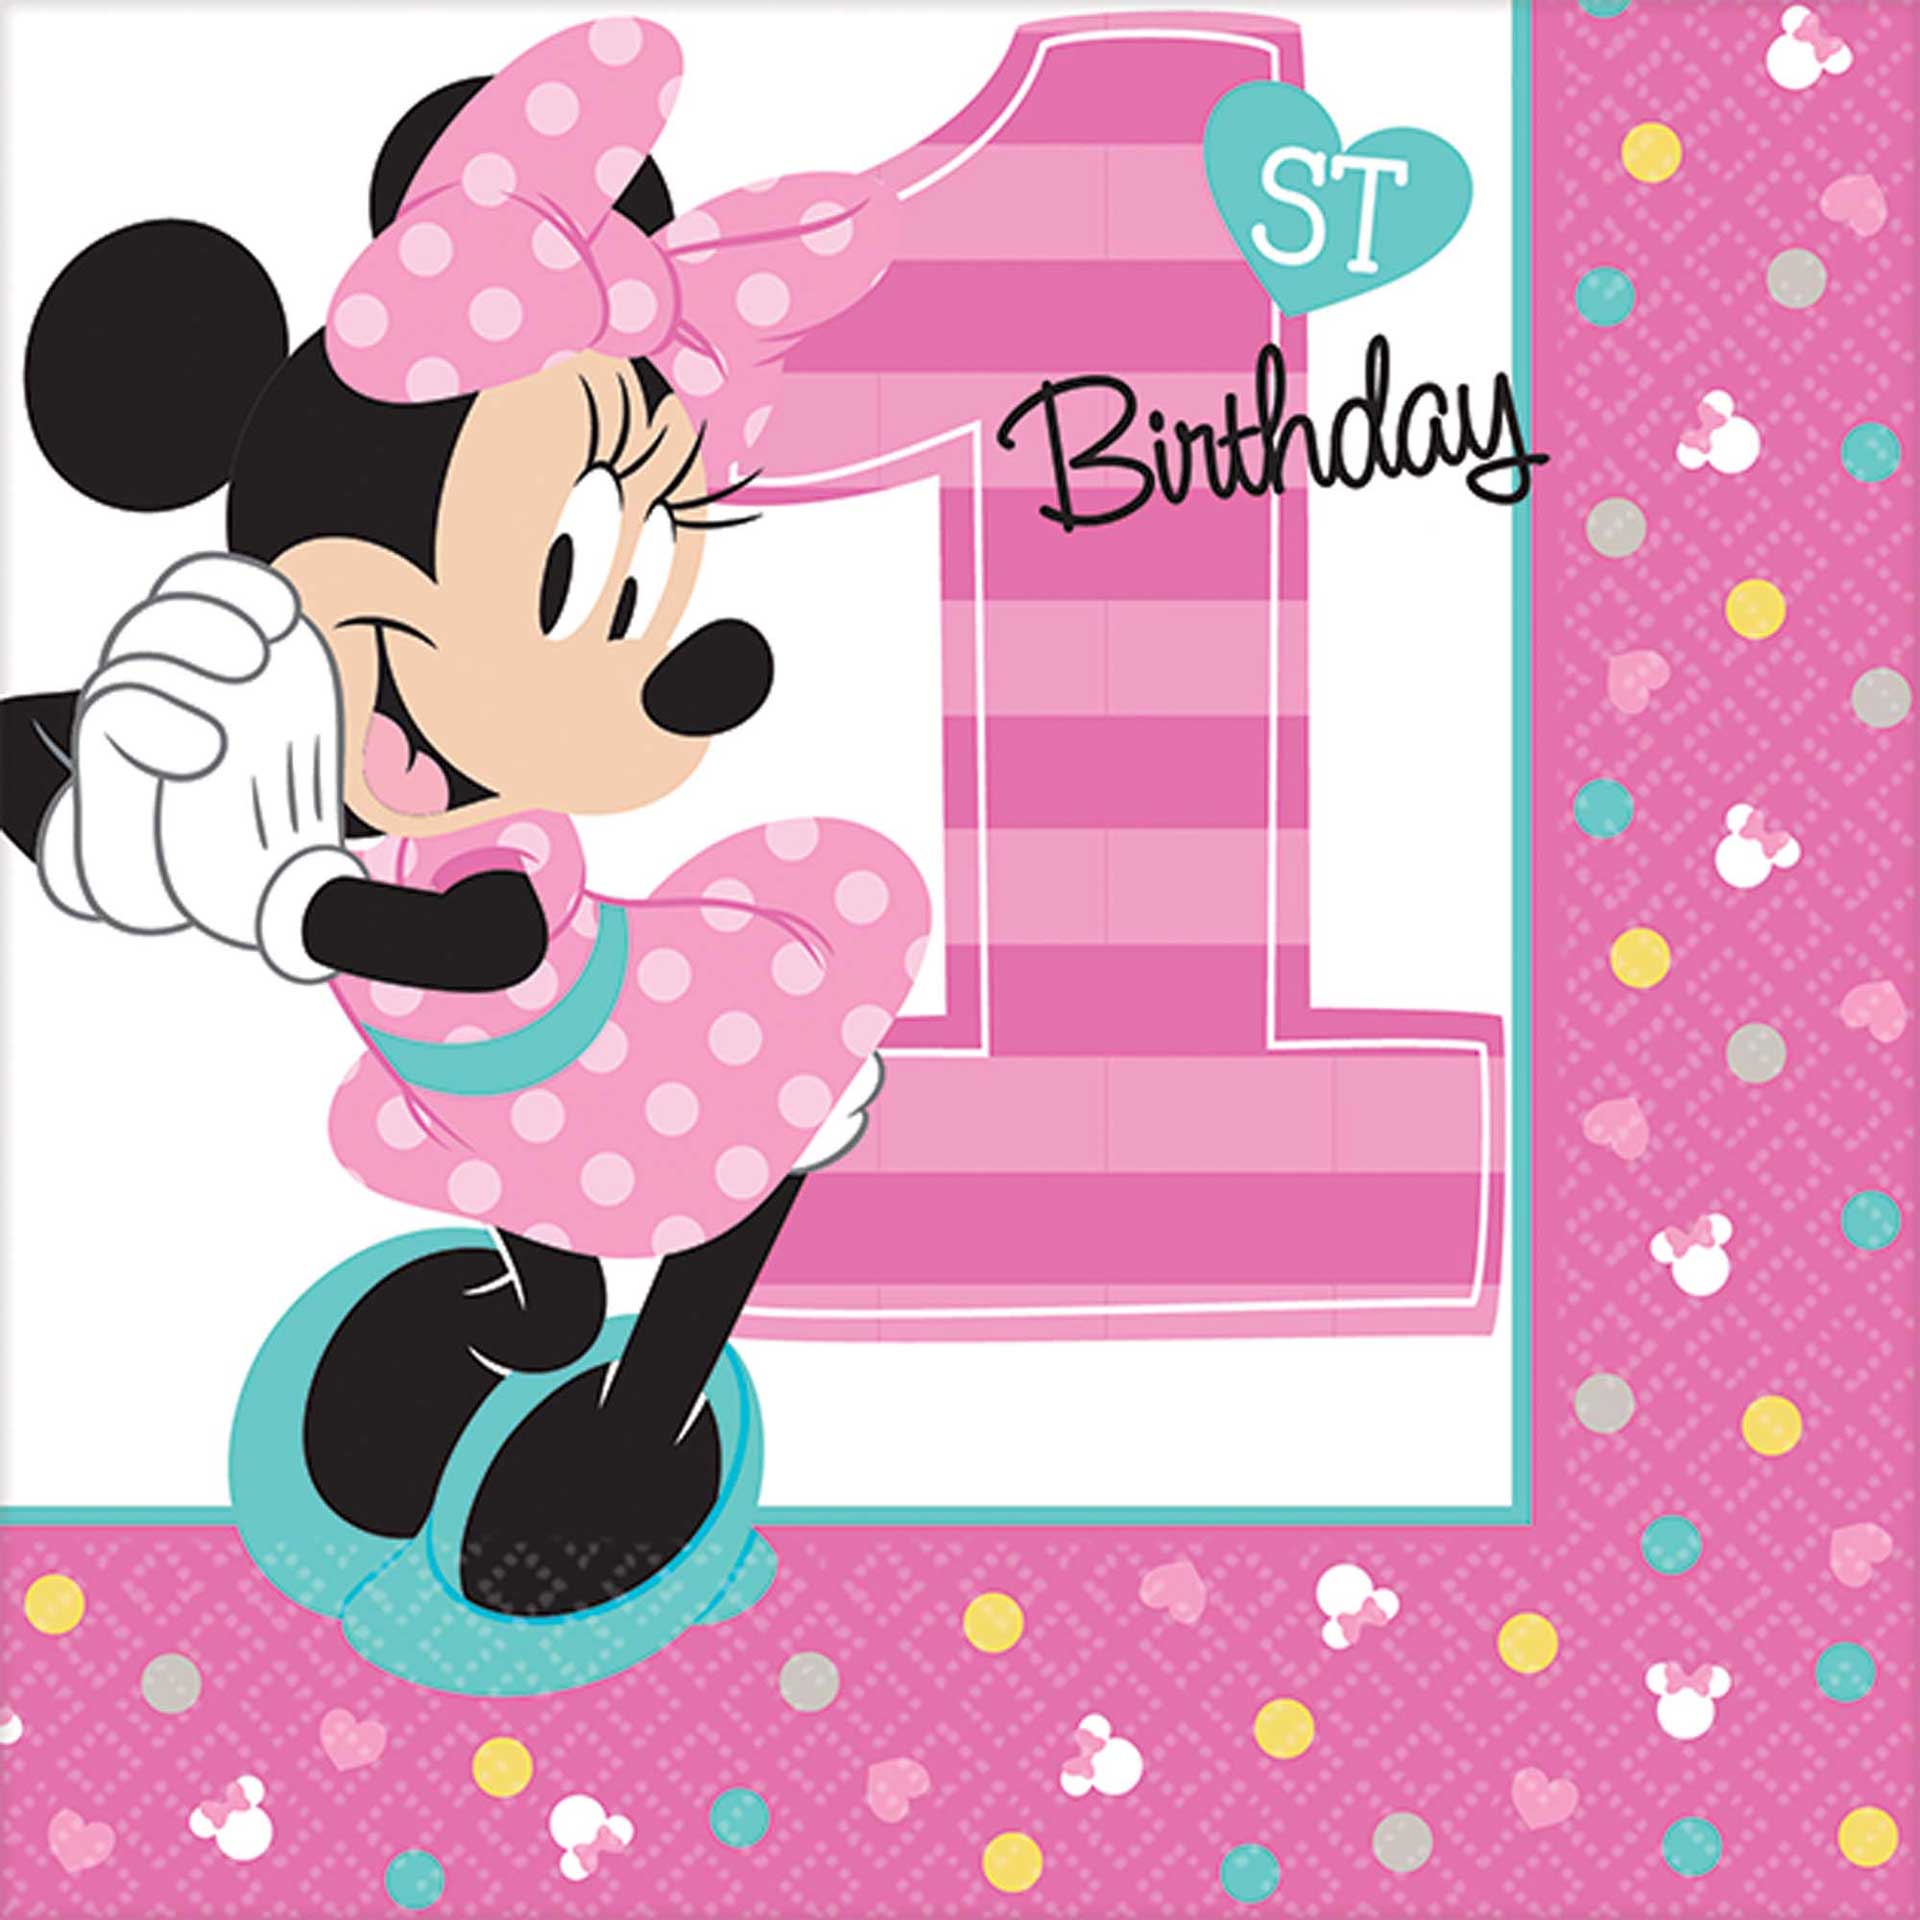 Minnie Mouse Birthday Wallpapers - Top Free Minnie Mouse Birthday ...